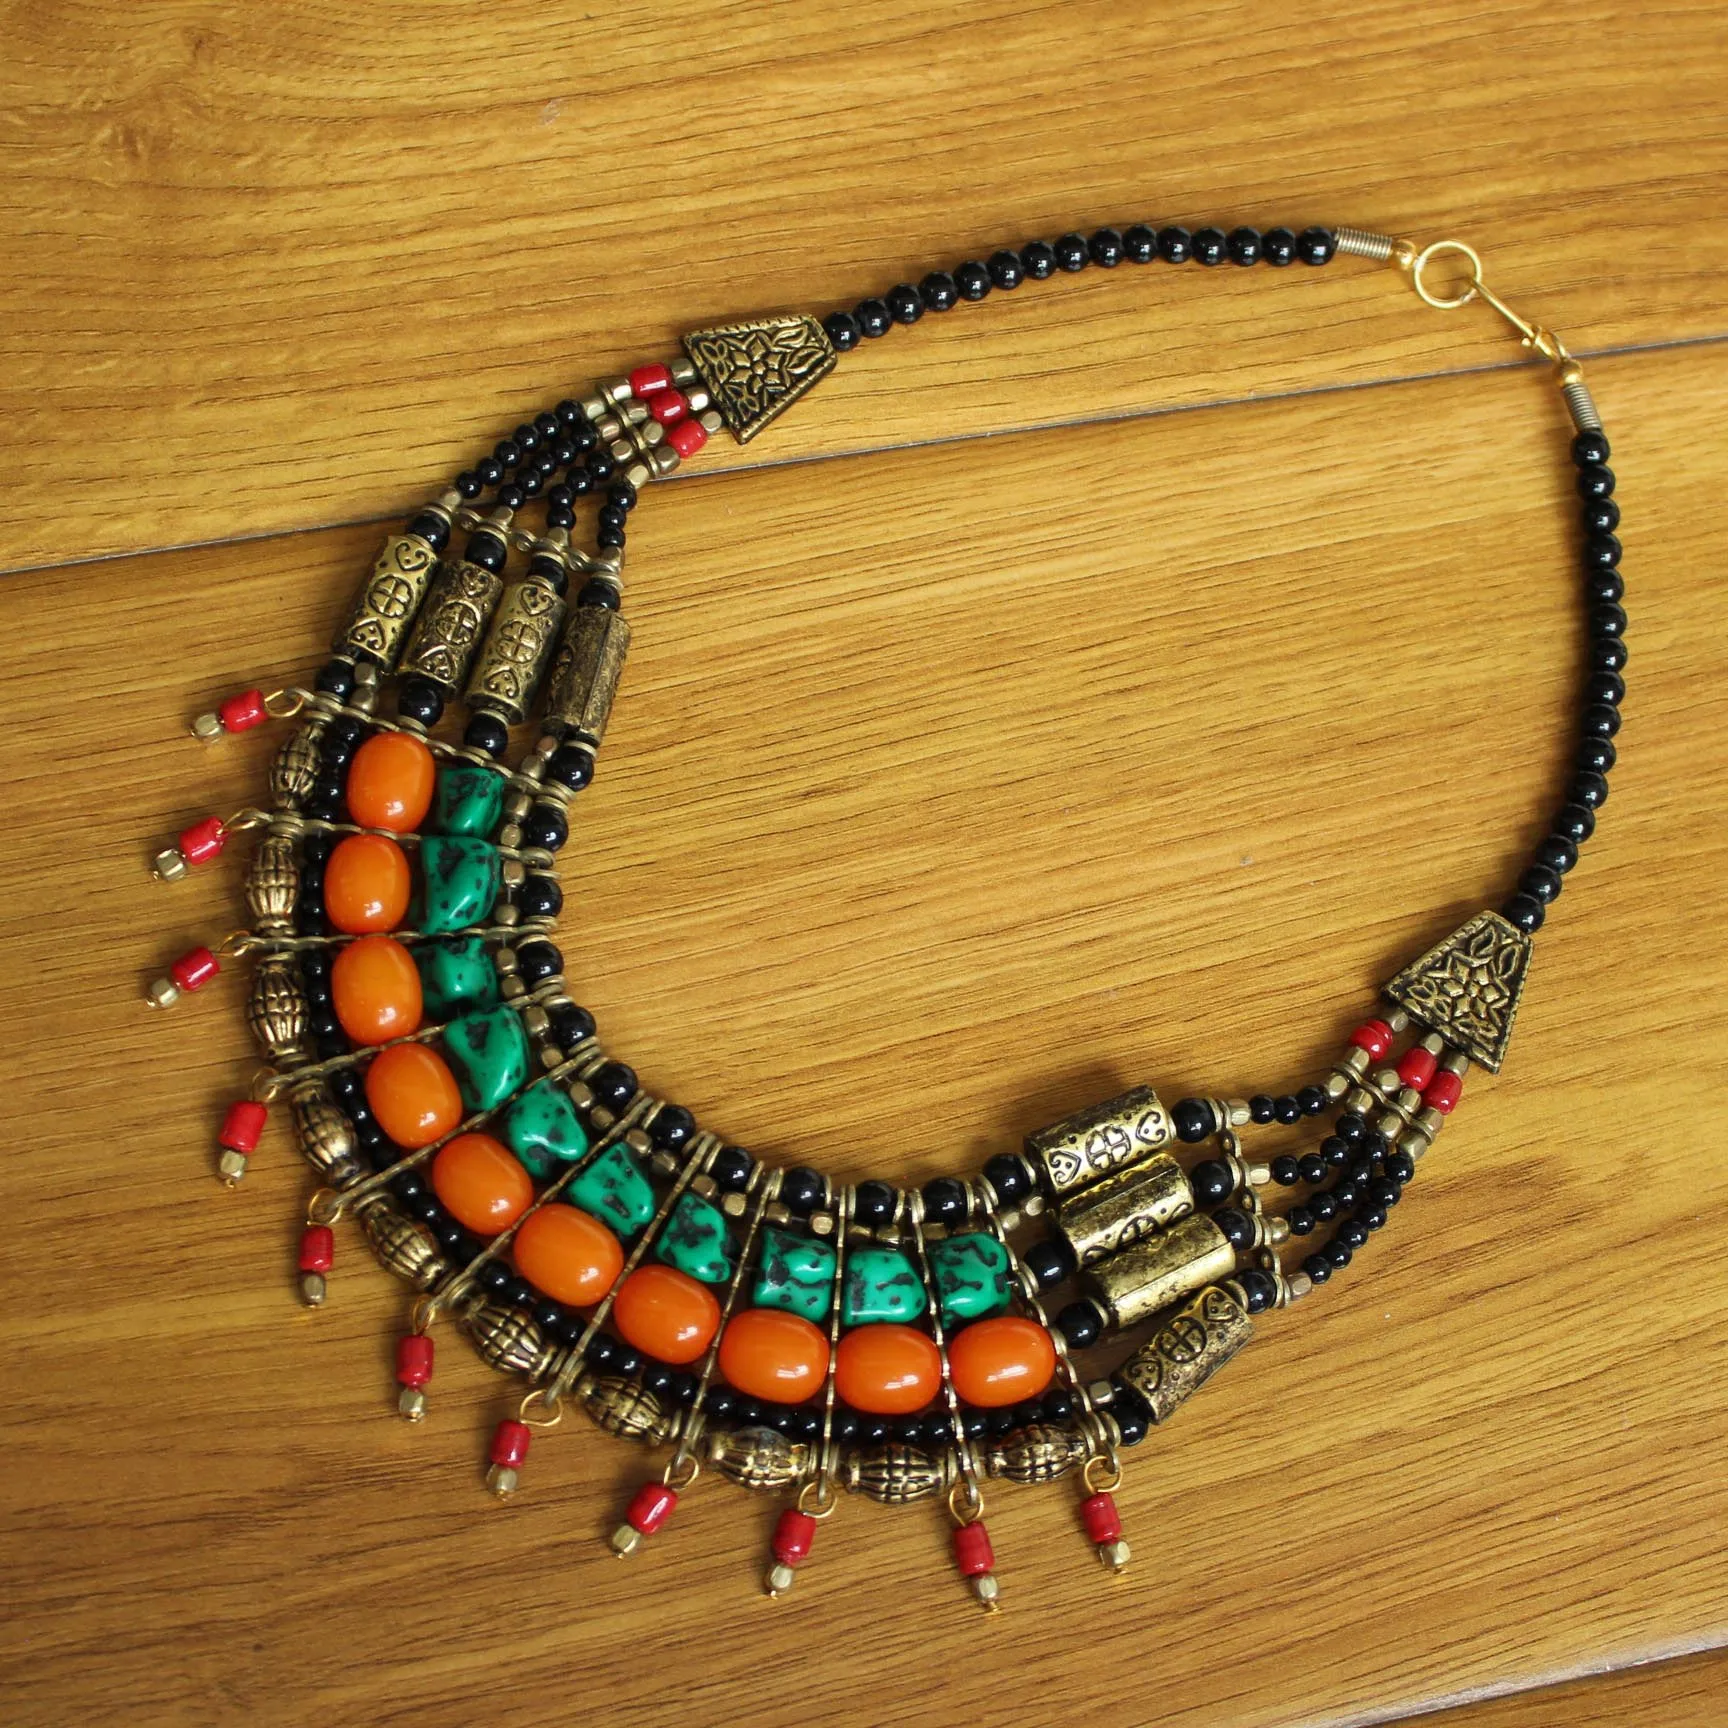 Ethnic Tibetan Handmade Necklace with Turquoise Lapis /& Coral Inlays Bohemian Necklace Handmade Necklace